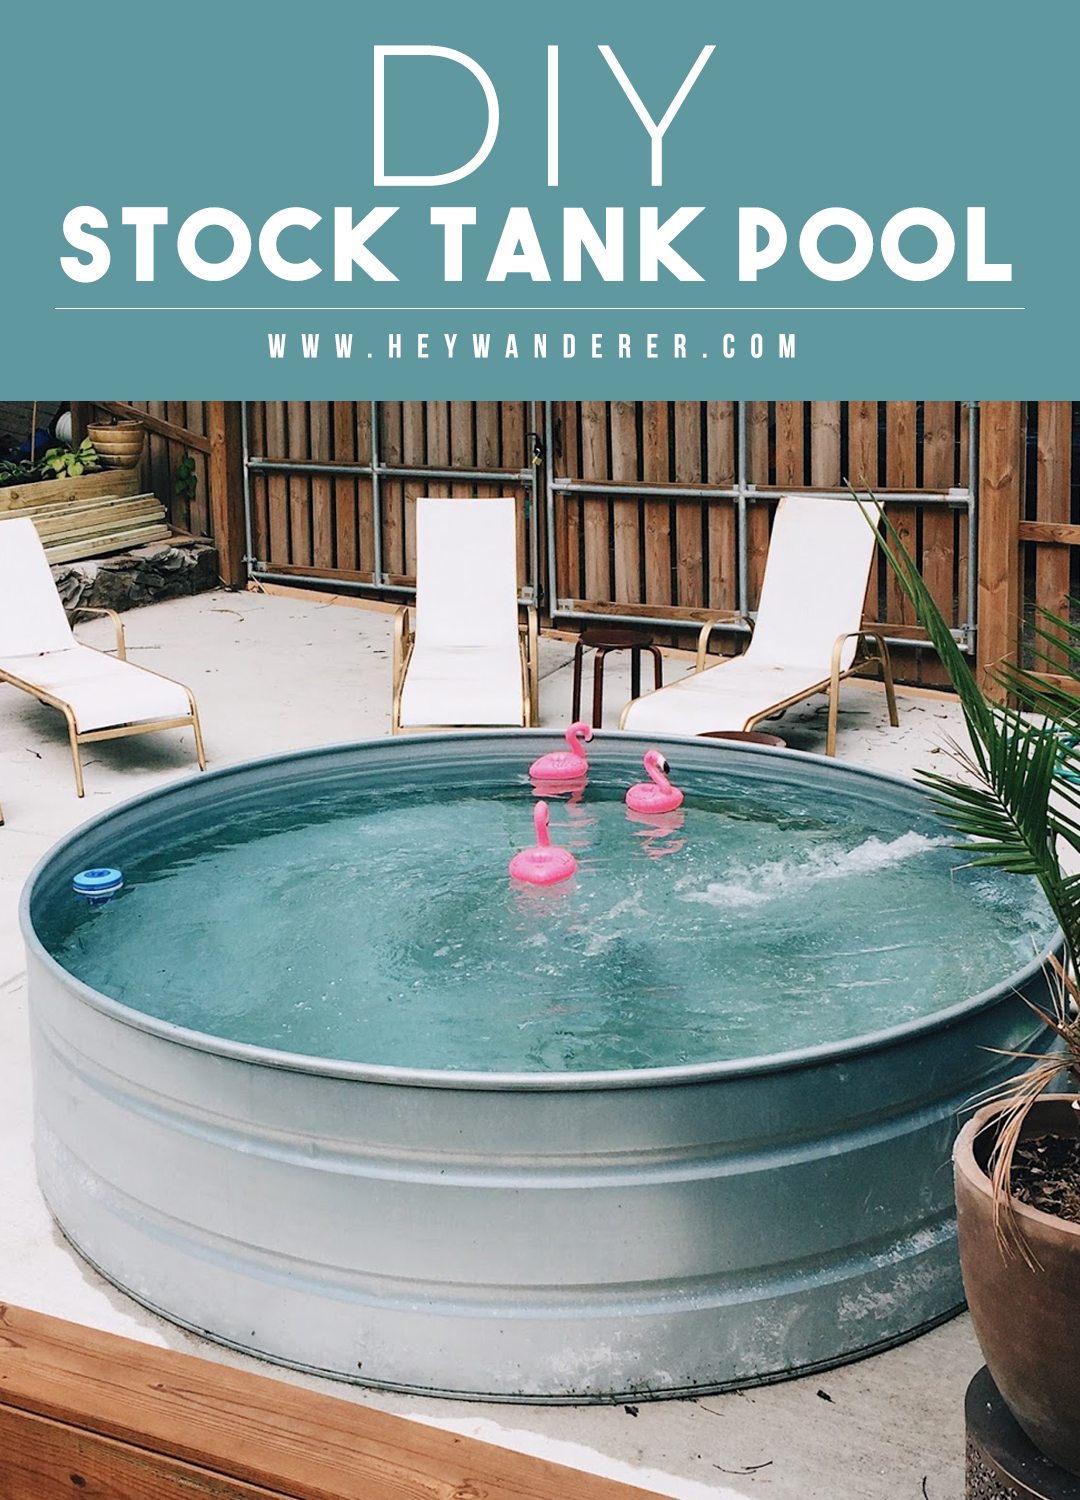 Onwijs Hot Tub DIY From A Stock Tank Pool KW-15